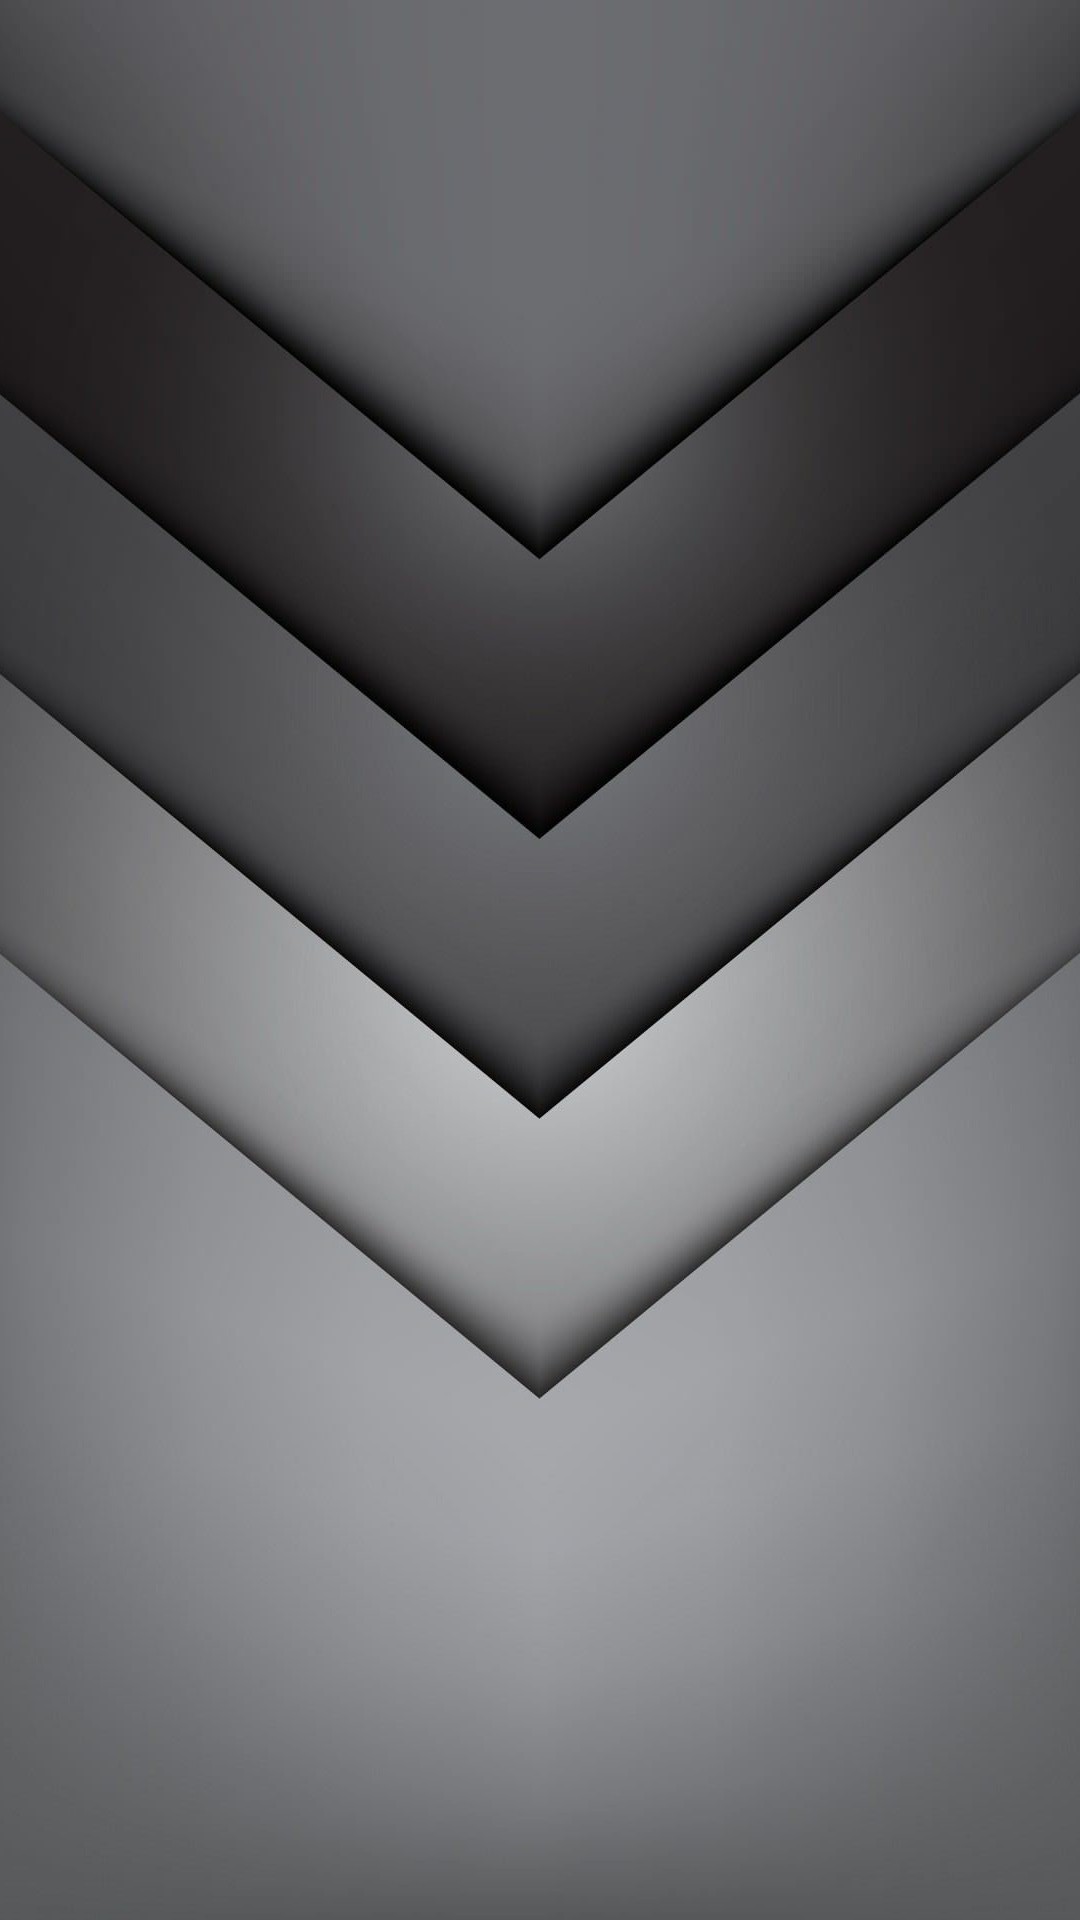 Wallpaper Android Foil High Resolution 1080X1920